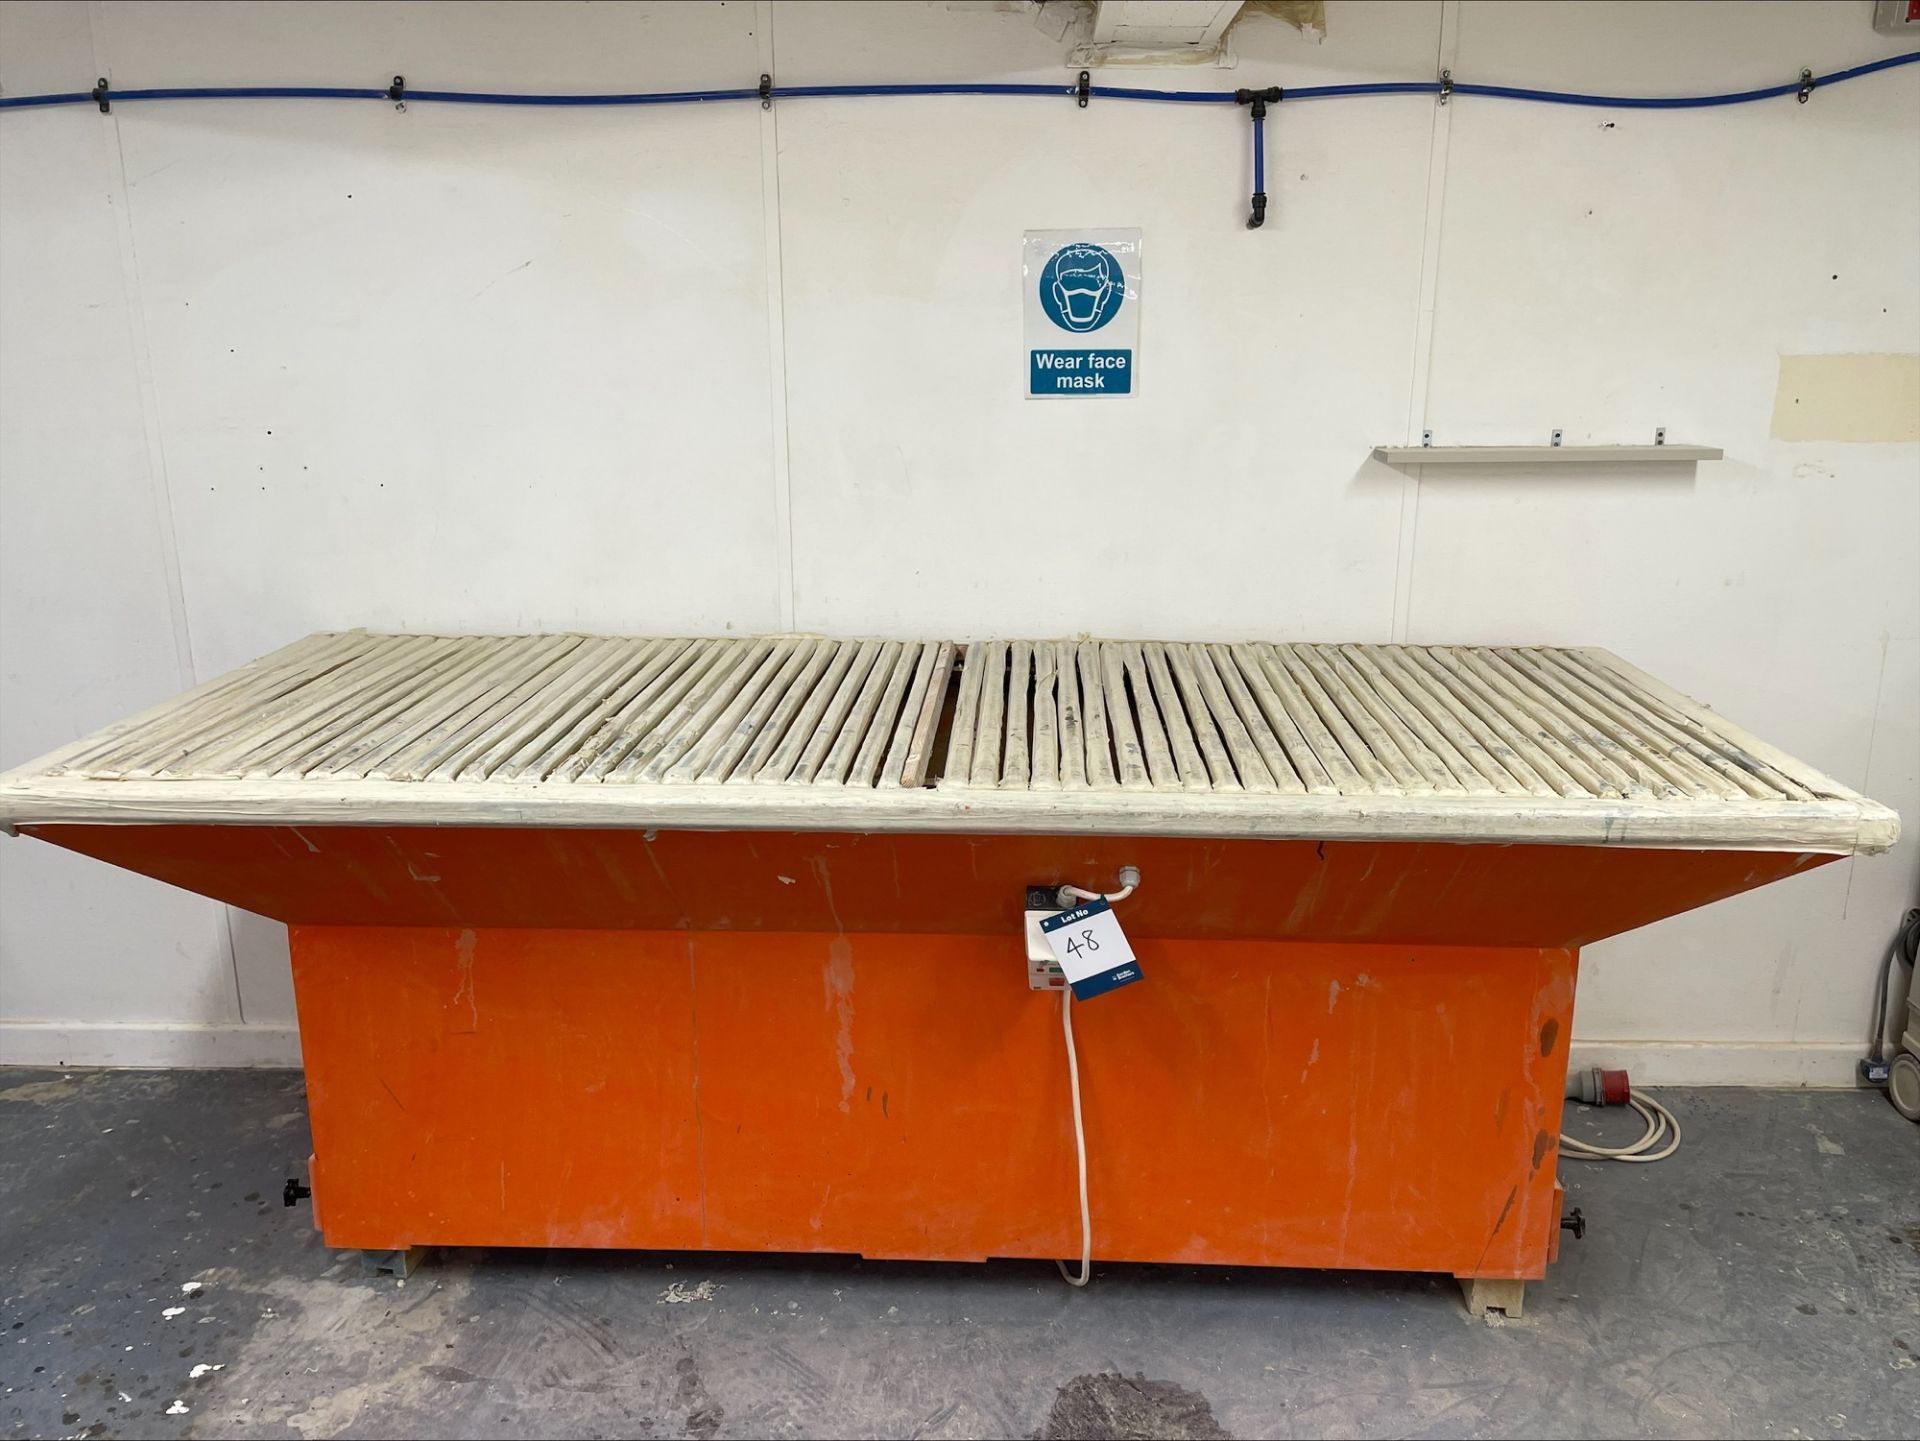 Down draught extraction workbench suitable for sanding, approx. 2500mm x 1010mm x 950mm